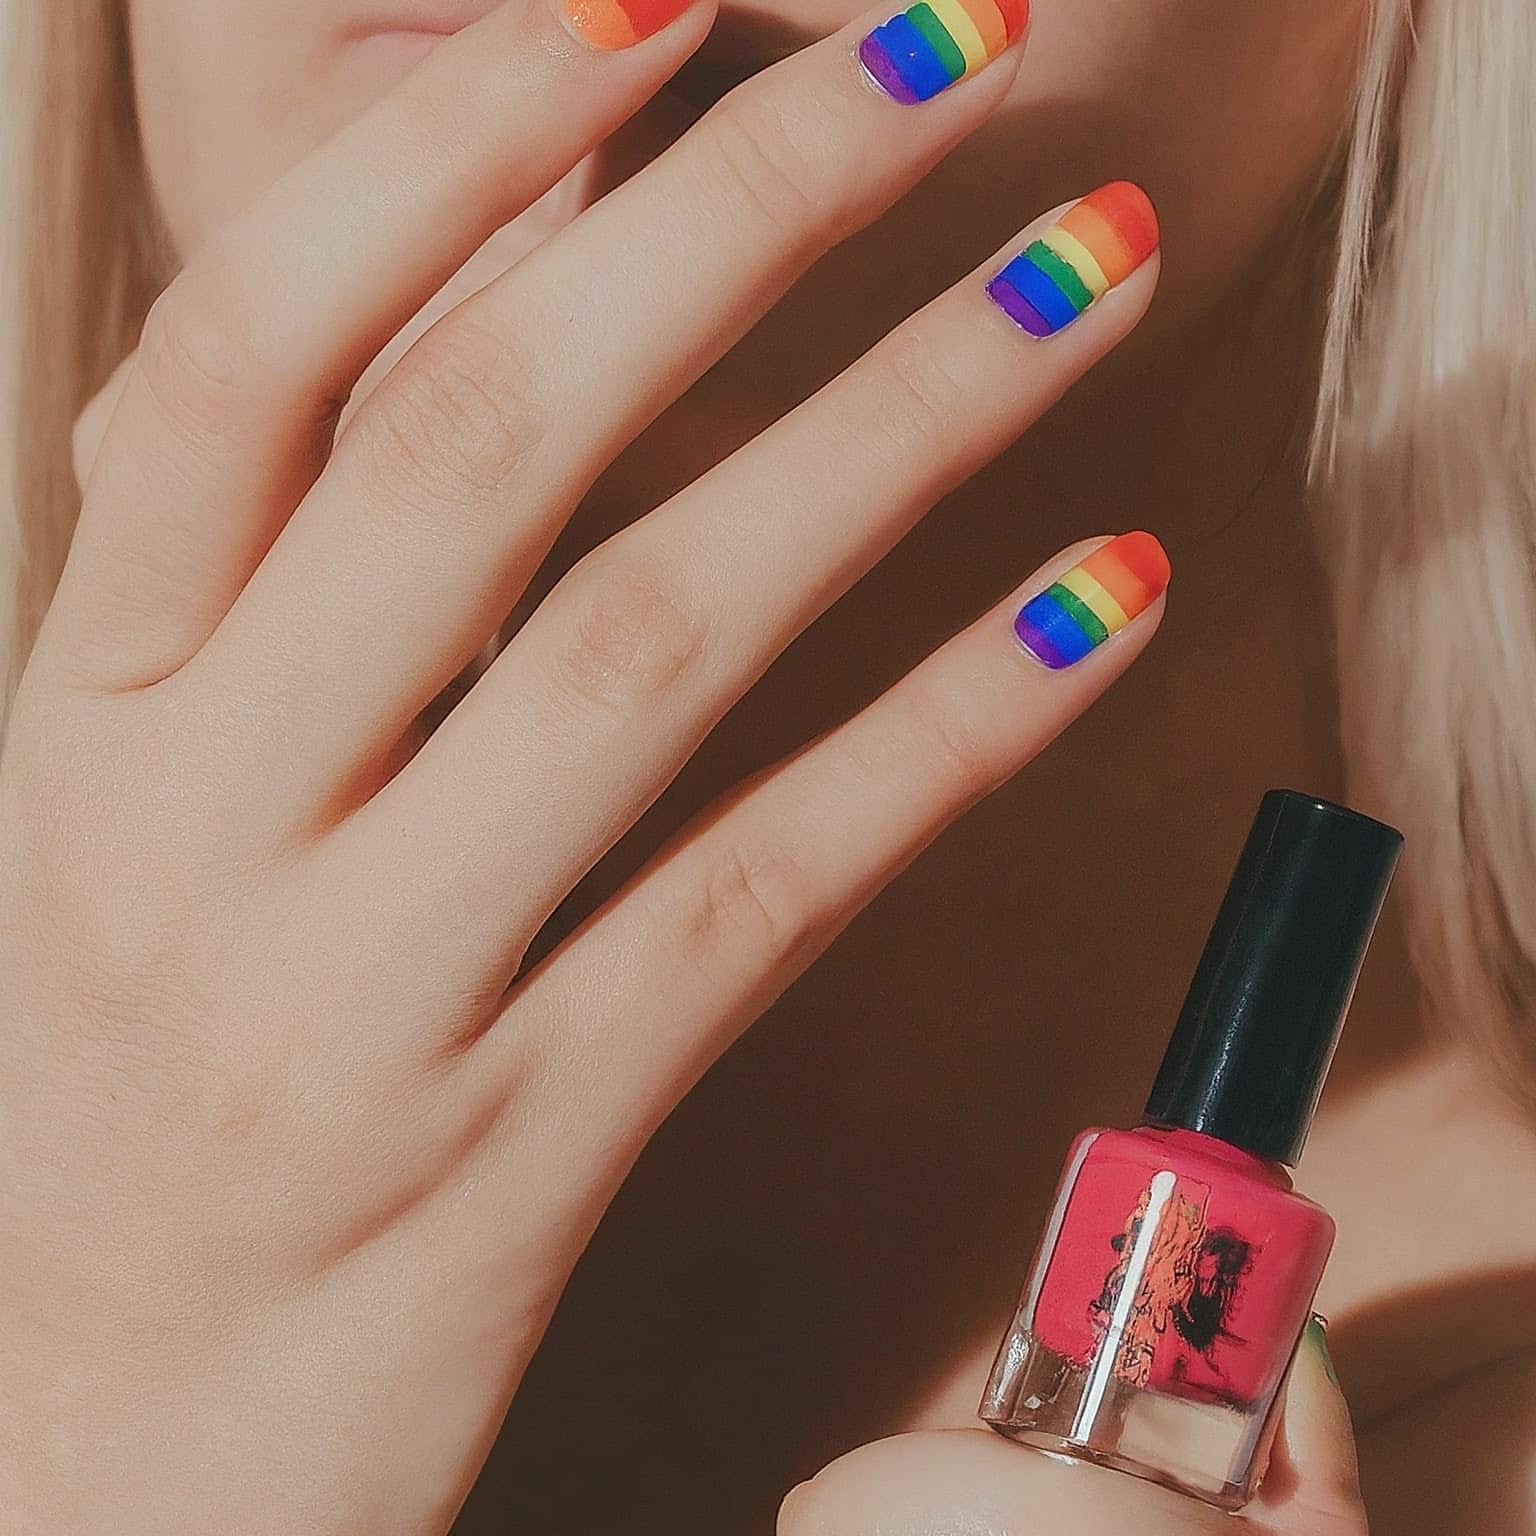 Biden’s Intel Community celebrating Pride Month with Free Trans Flag manicures